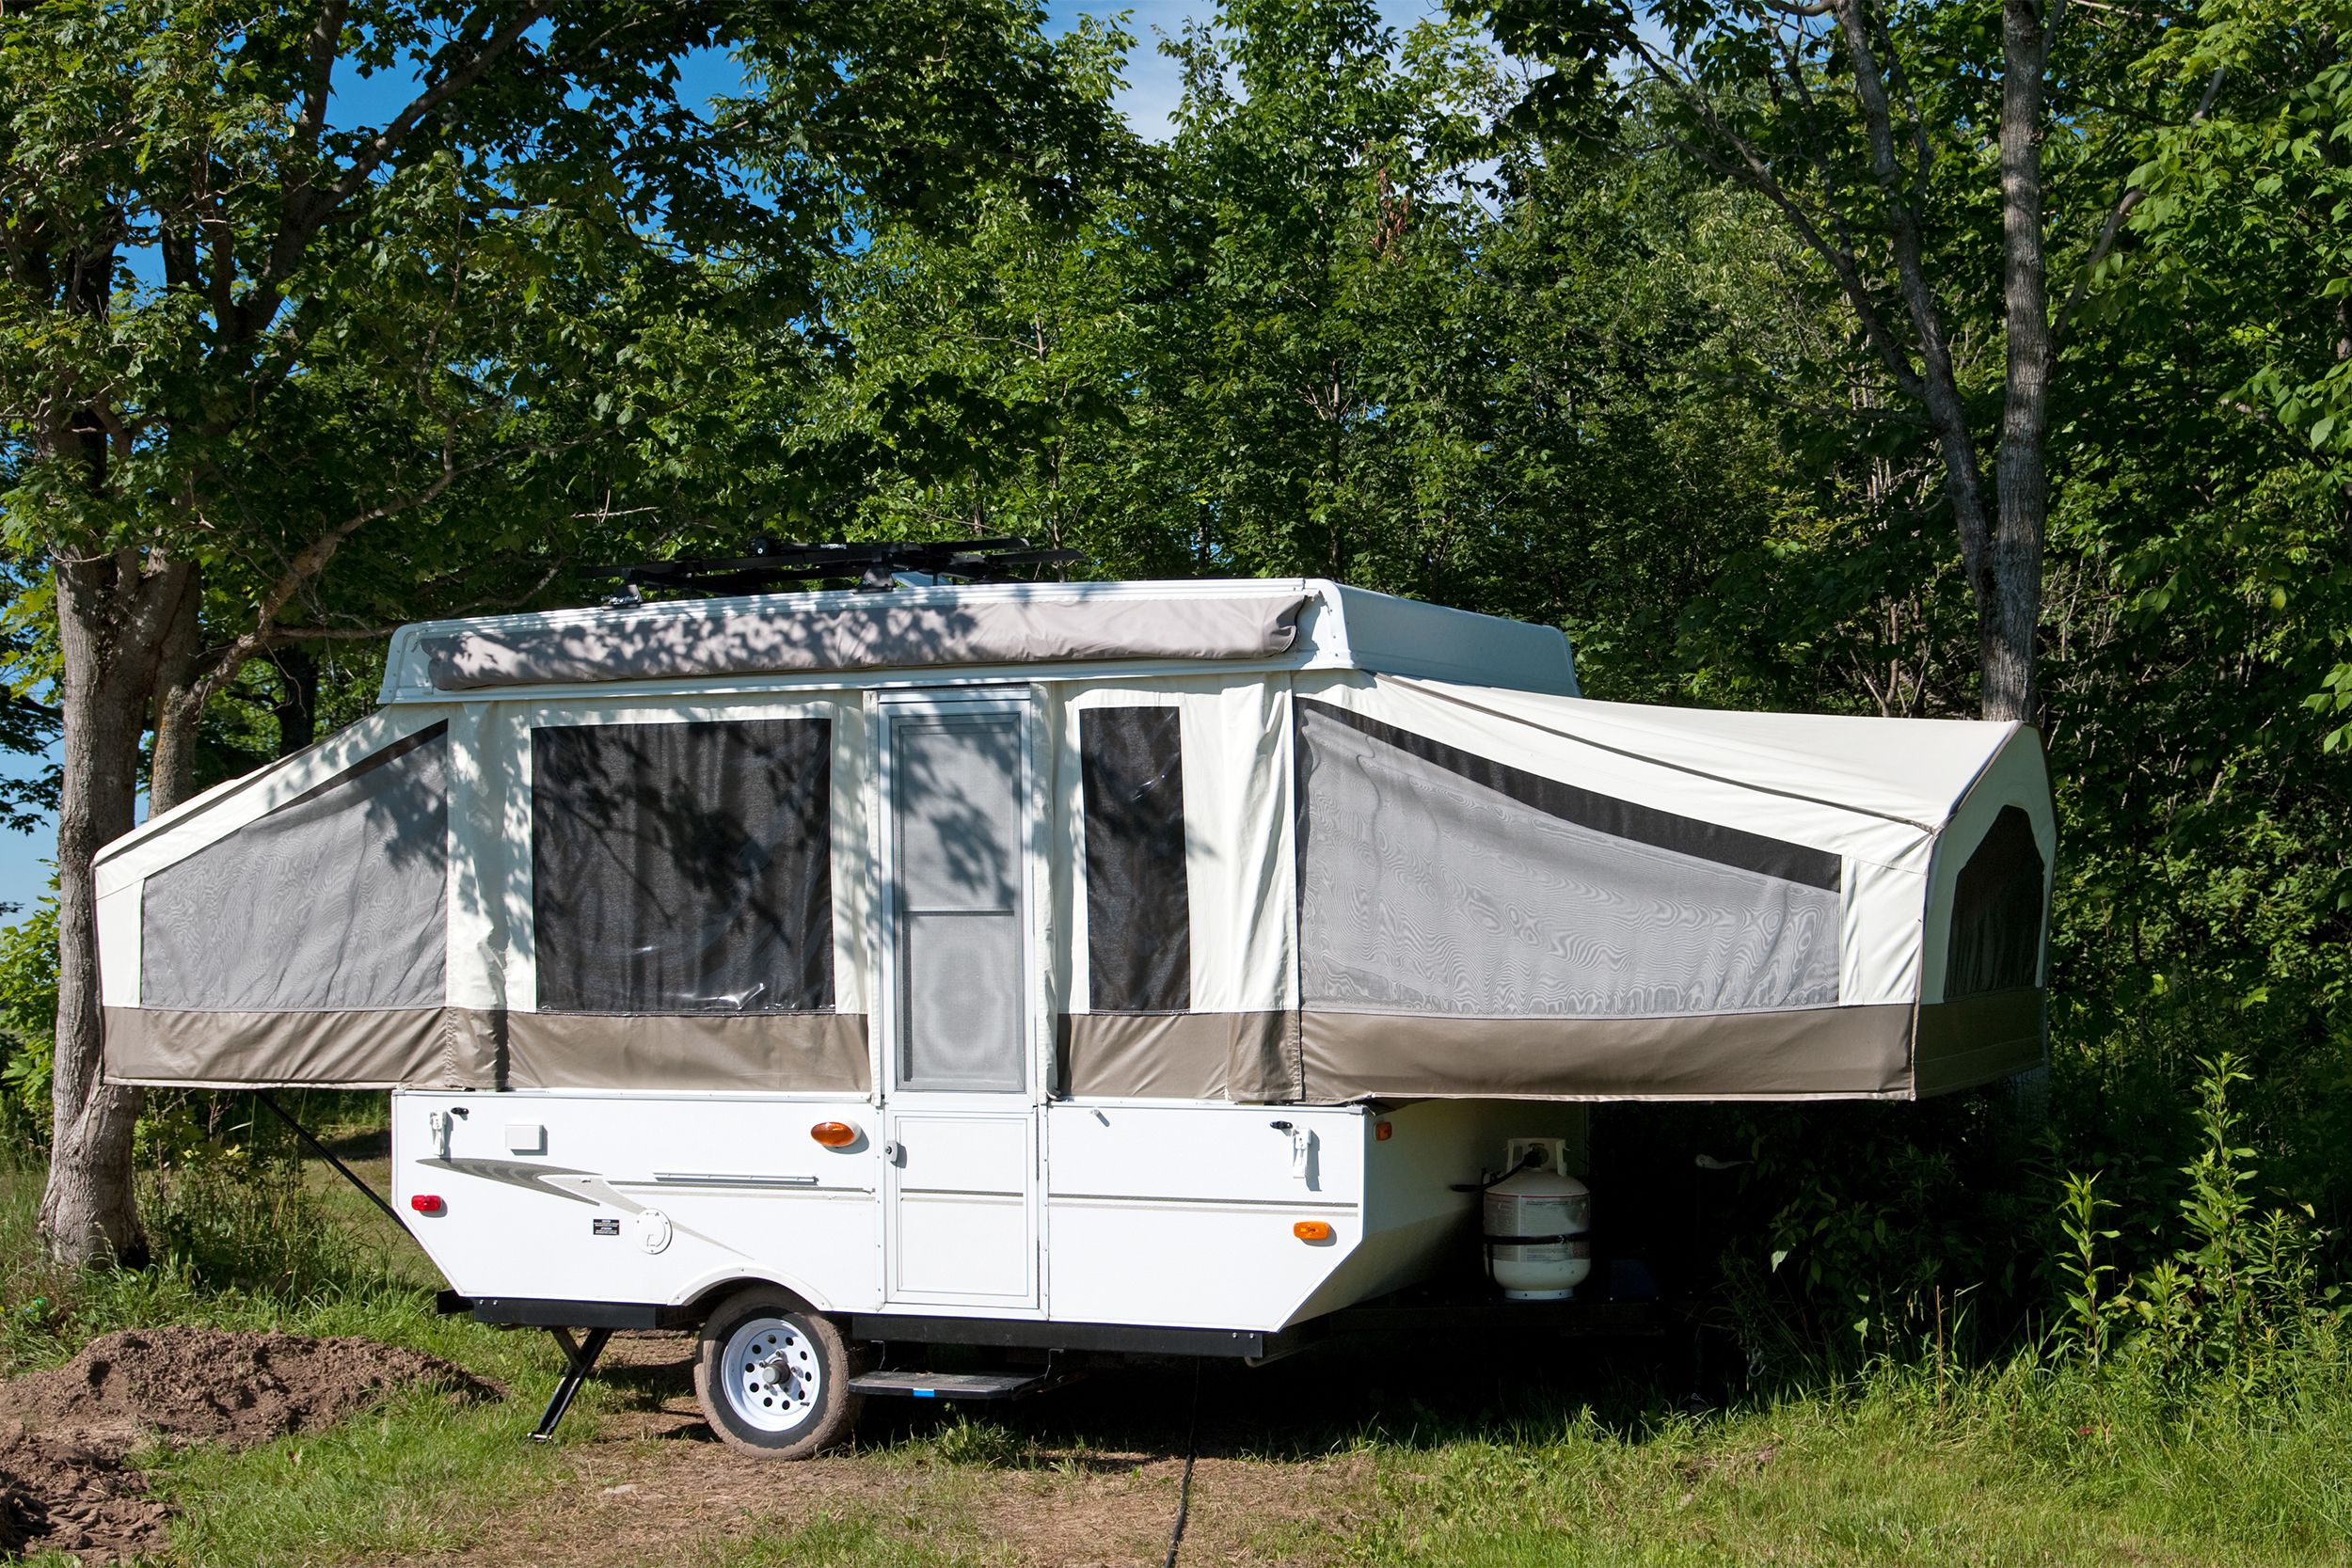 <p>Average RV prices can range from $5,000 to more than $140,000 new, the RVIA says. Some price tags even stretch into the millions of dollars, although this isn’t average. The cheapest type of RV tends to be folding camping trailers, commonly called pop-ups; Class A motorhomes, which have the buslike front windshield, are typically the most expensive.</p>